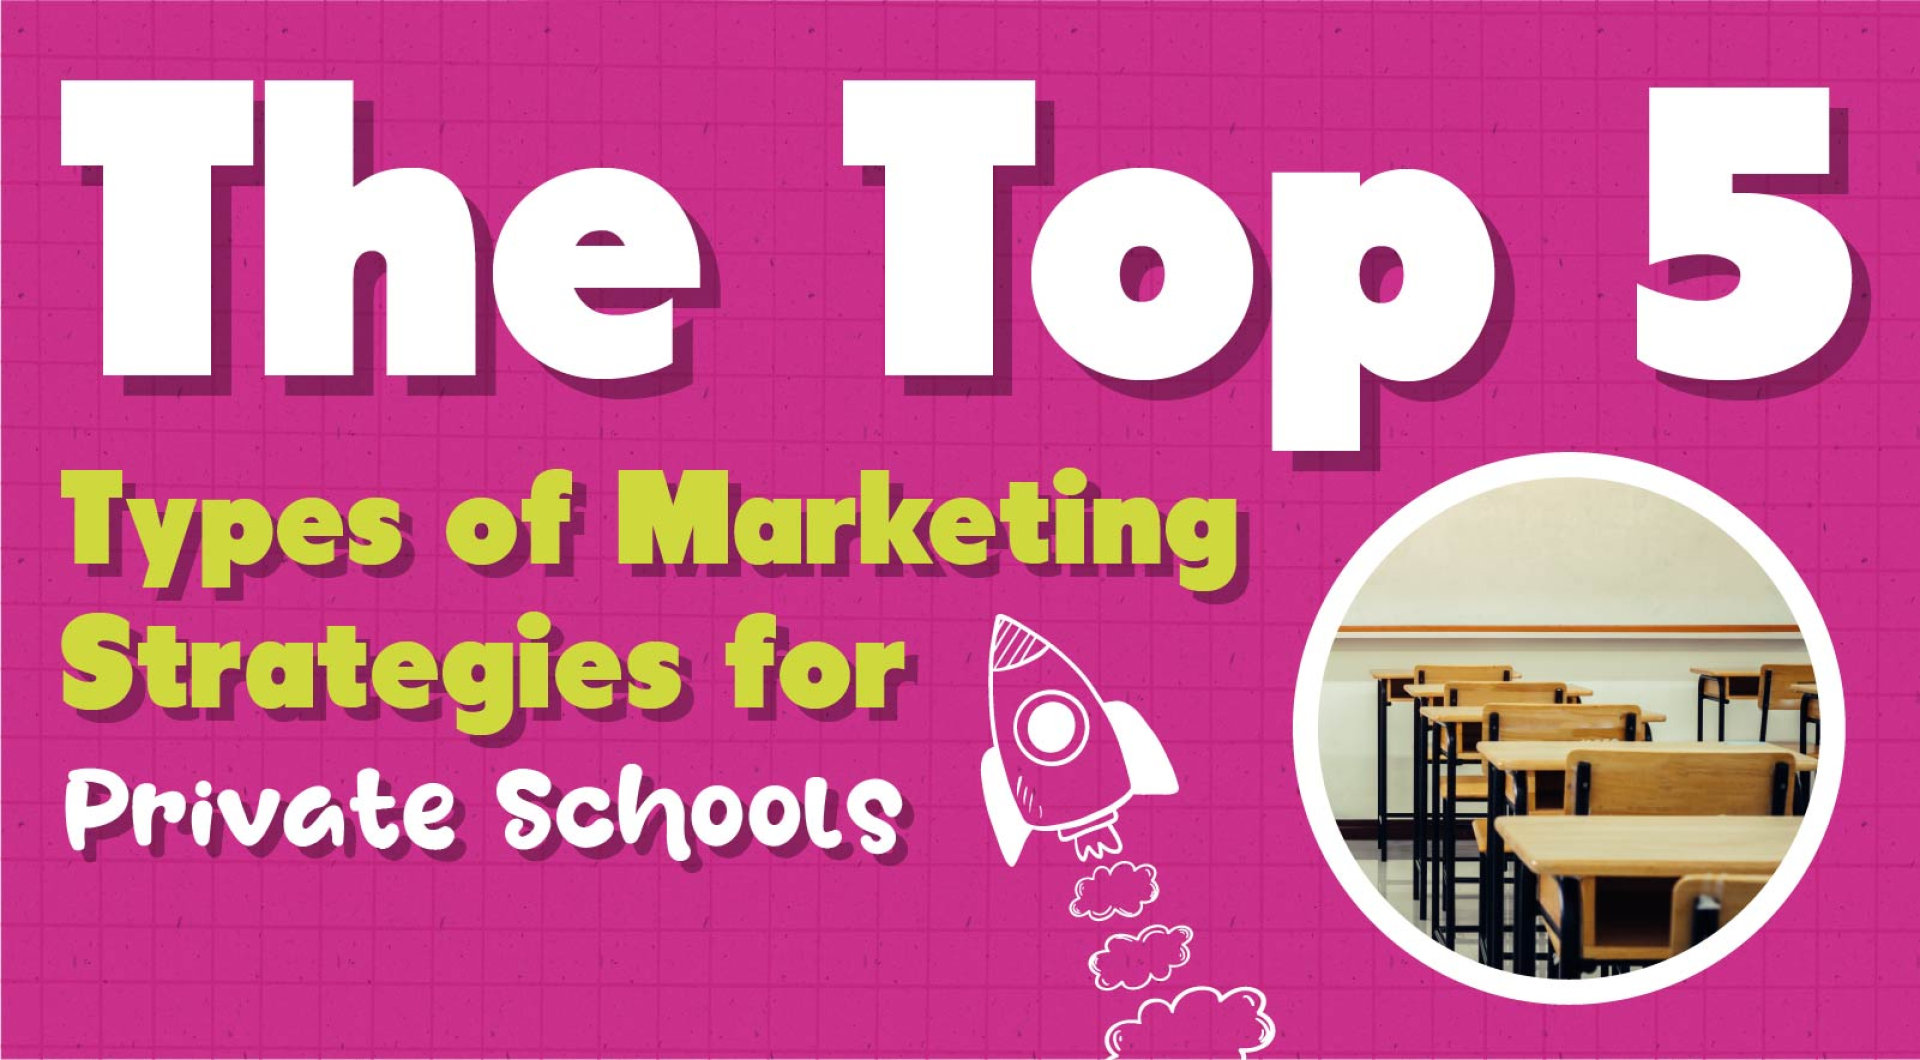 What are the Top 5 Types of Marketing Strategies for Private Schools